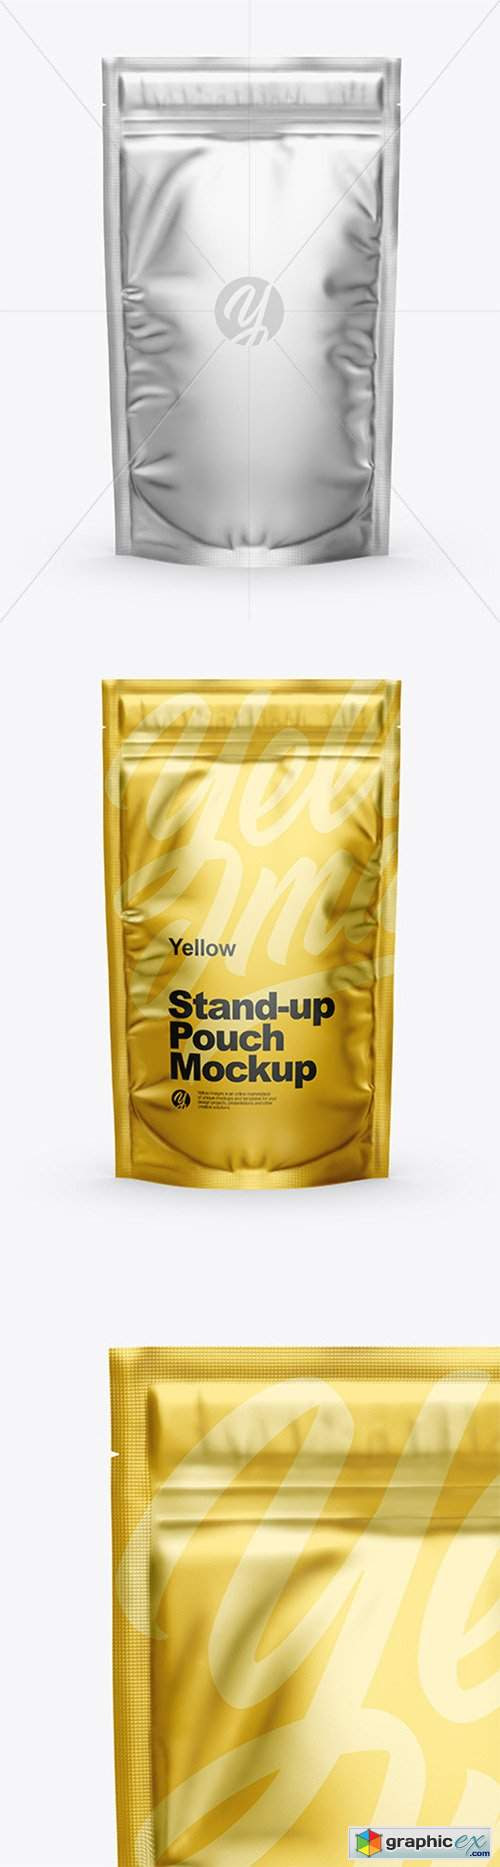 Matte Metallic Stand Up Pouch with Zipper Mockup Â» Free Download Vector